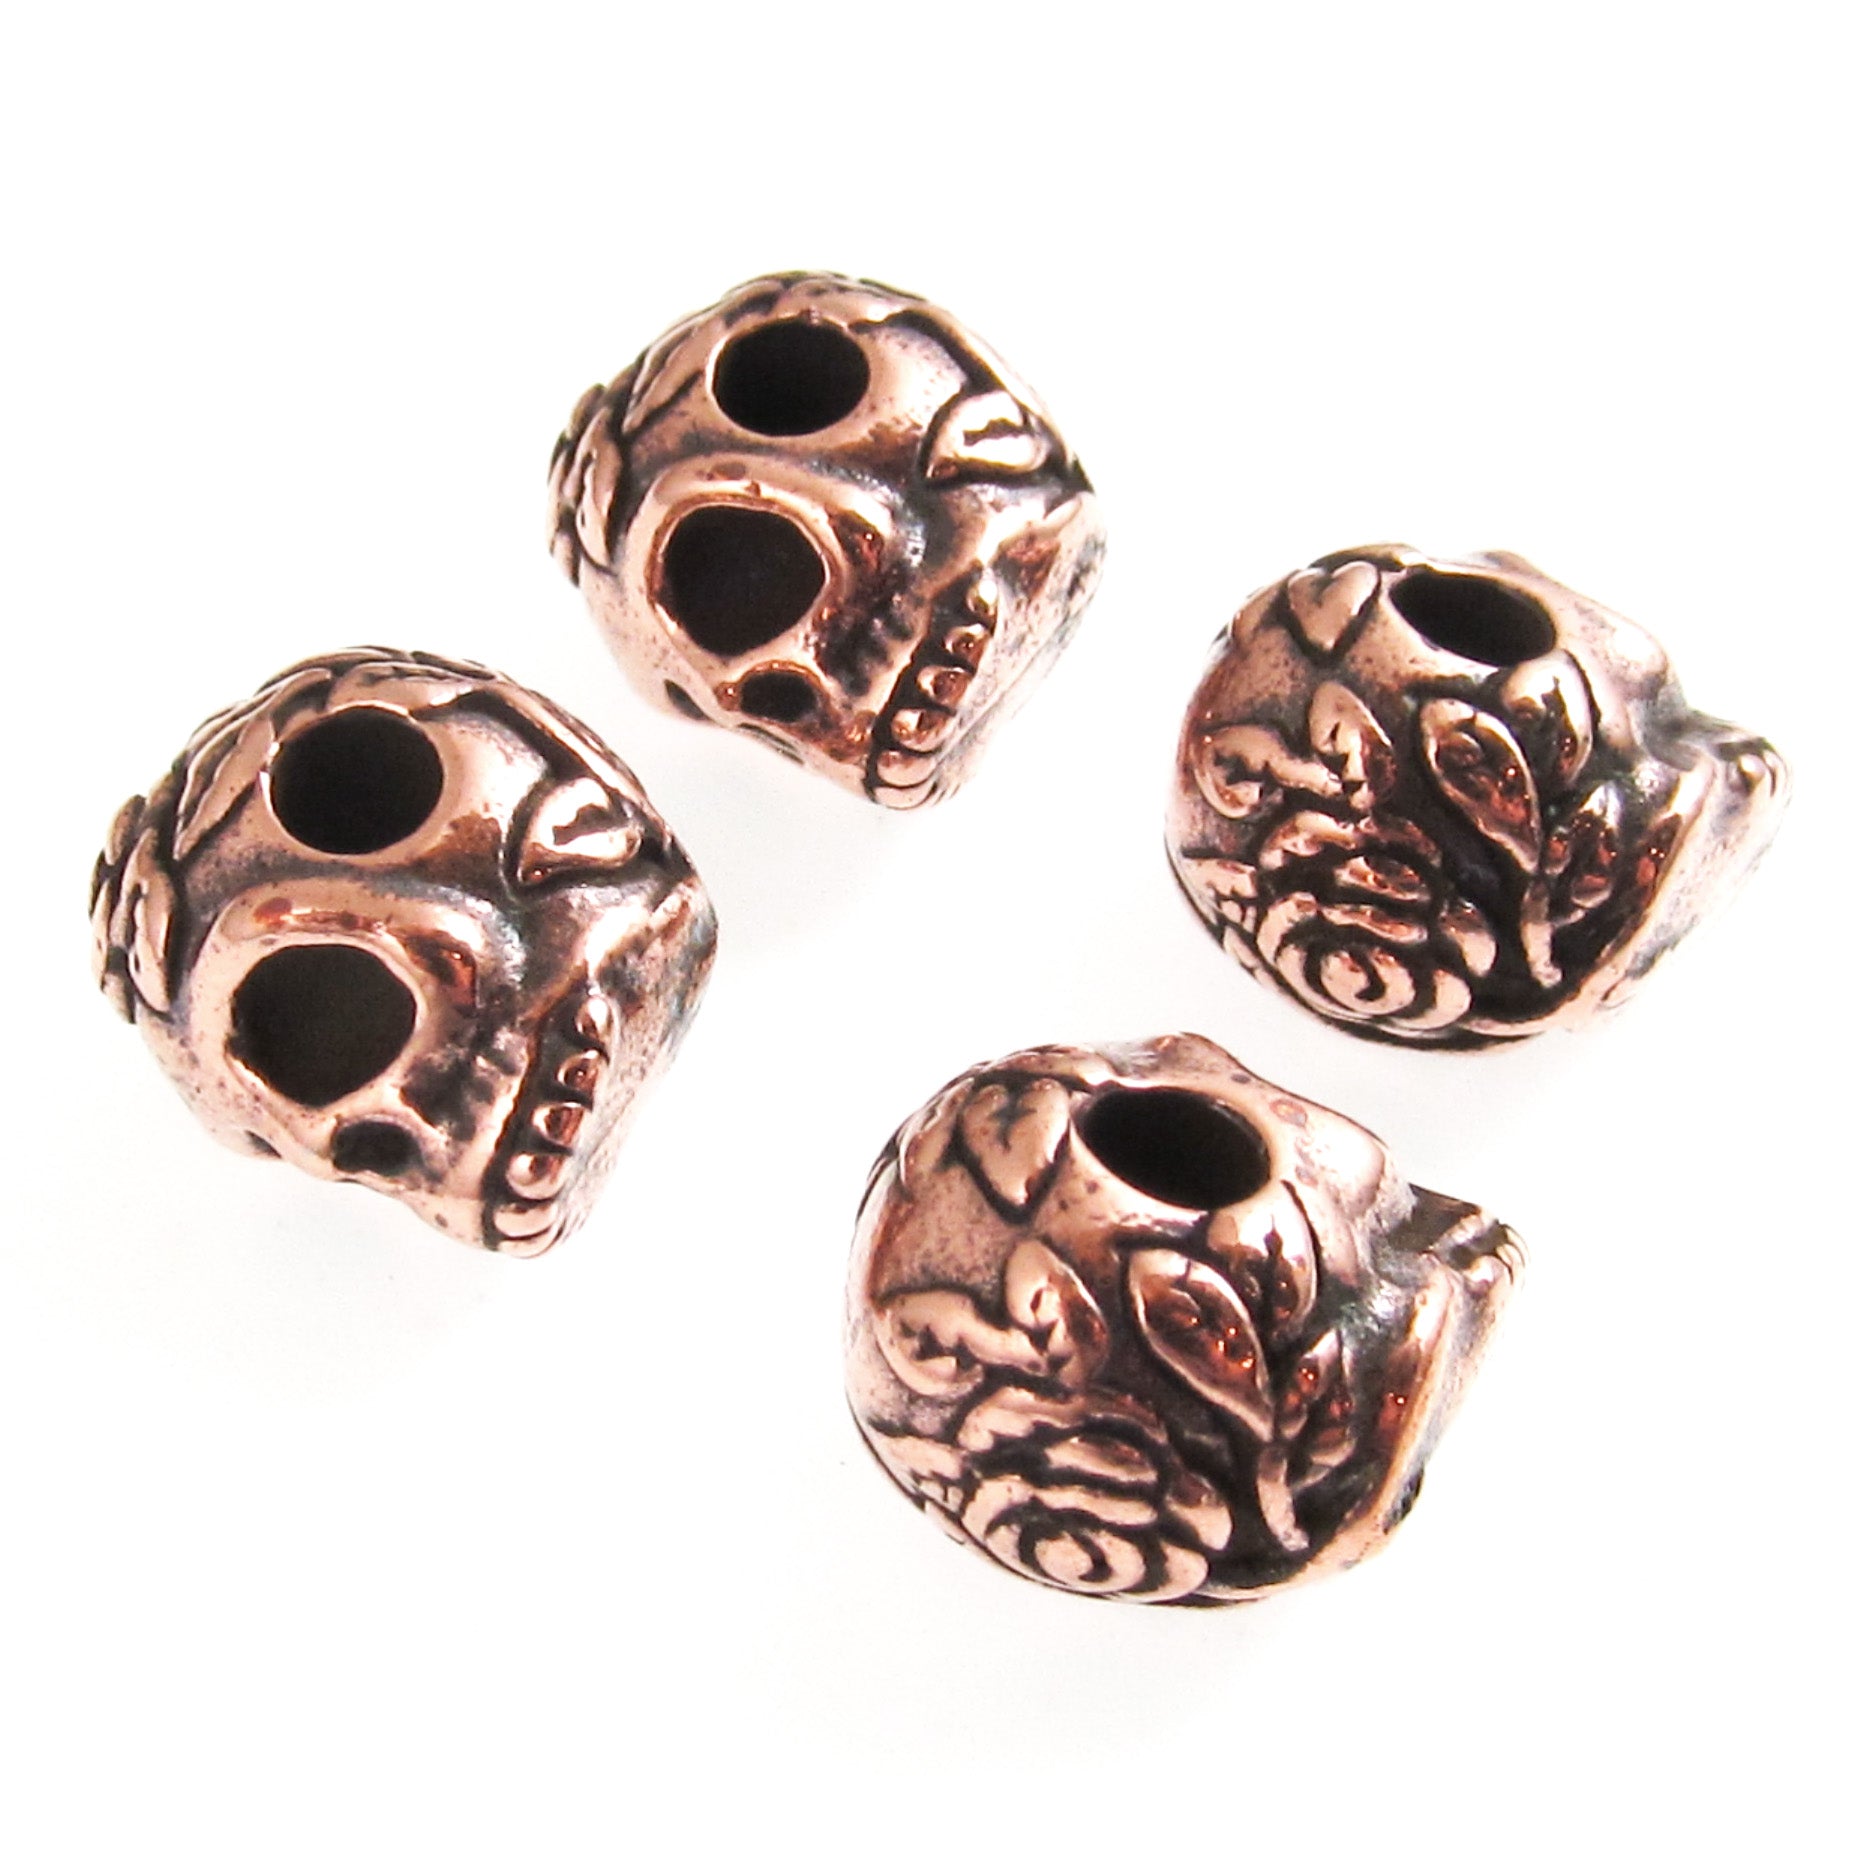 Sugar Skull Beads TierraCast Antique Silver 10mm Big Hole Beads, Large  Hole, Qty 4 Rose Skulls, Day of the Dead Jewelry